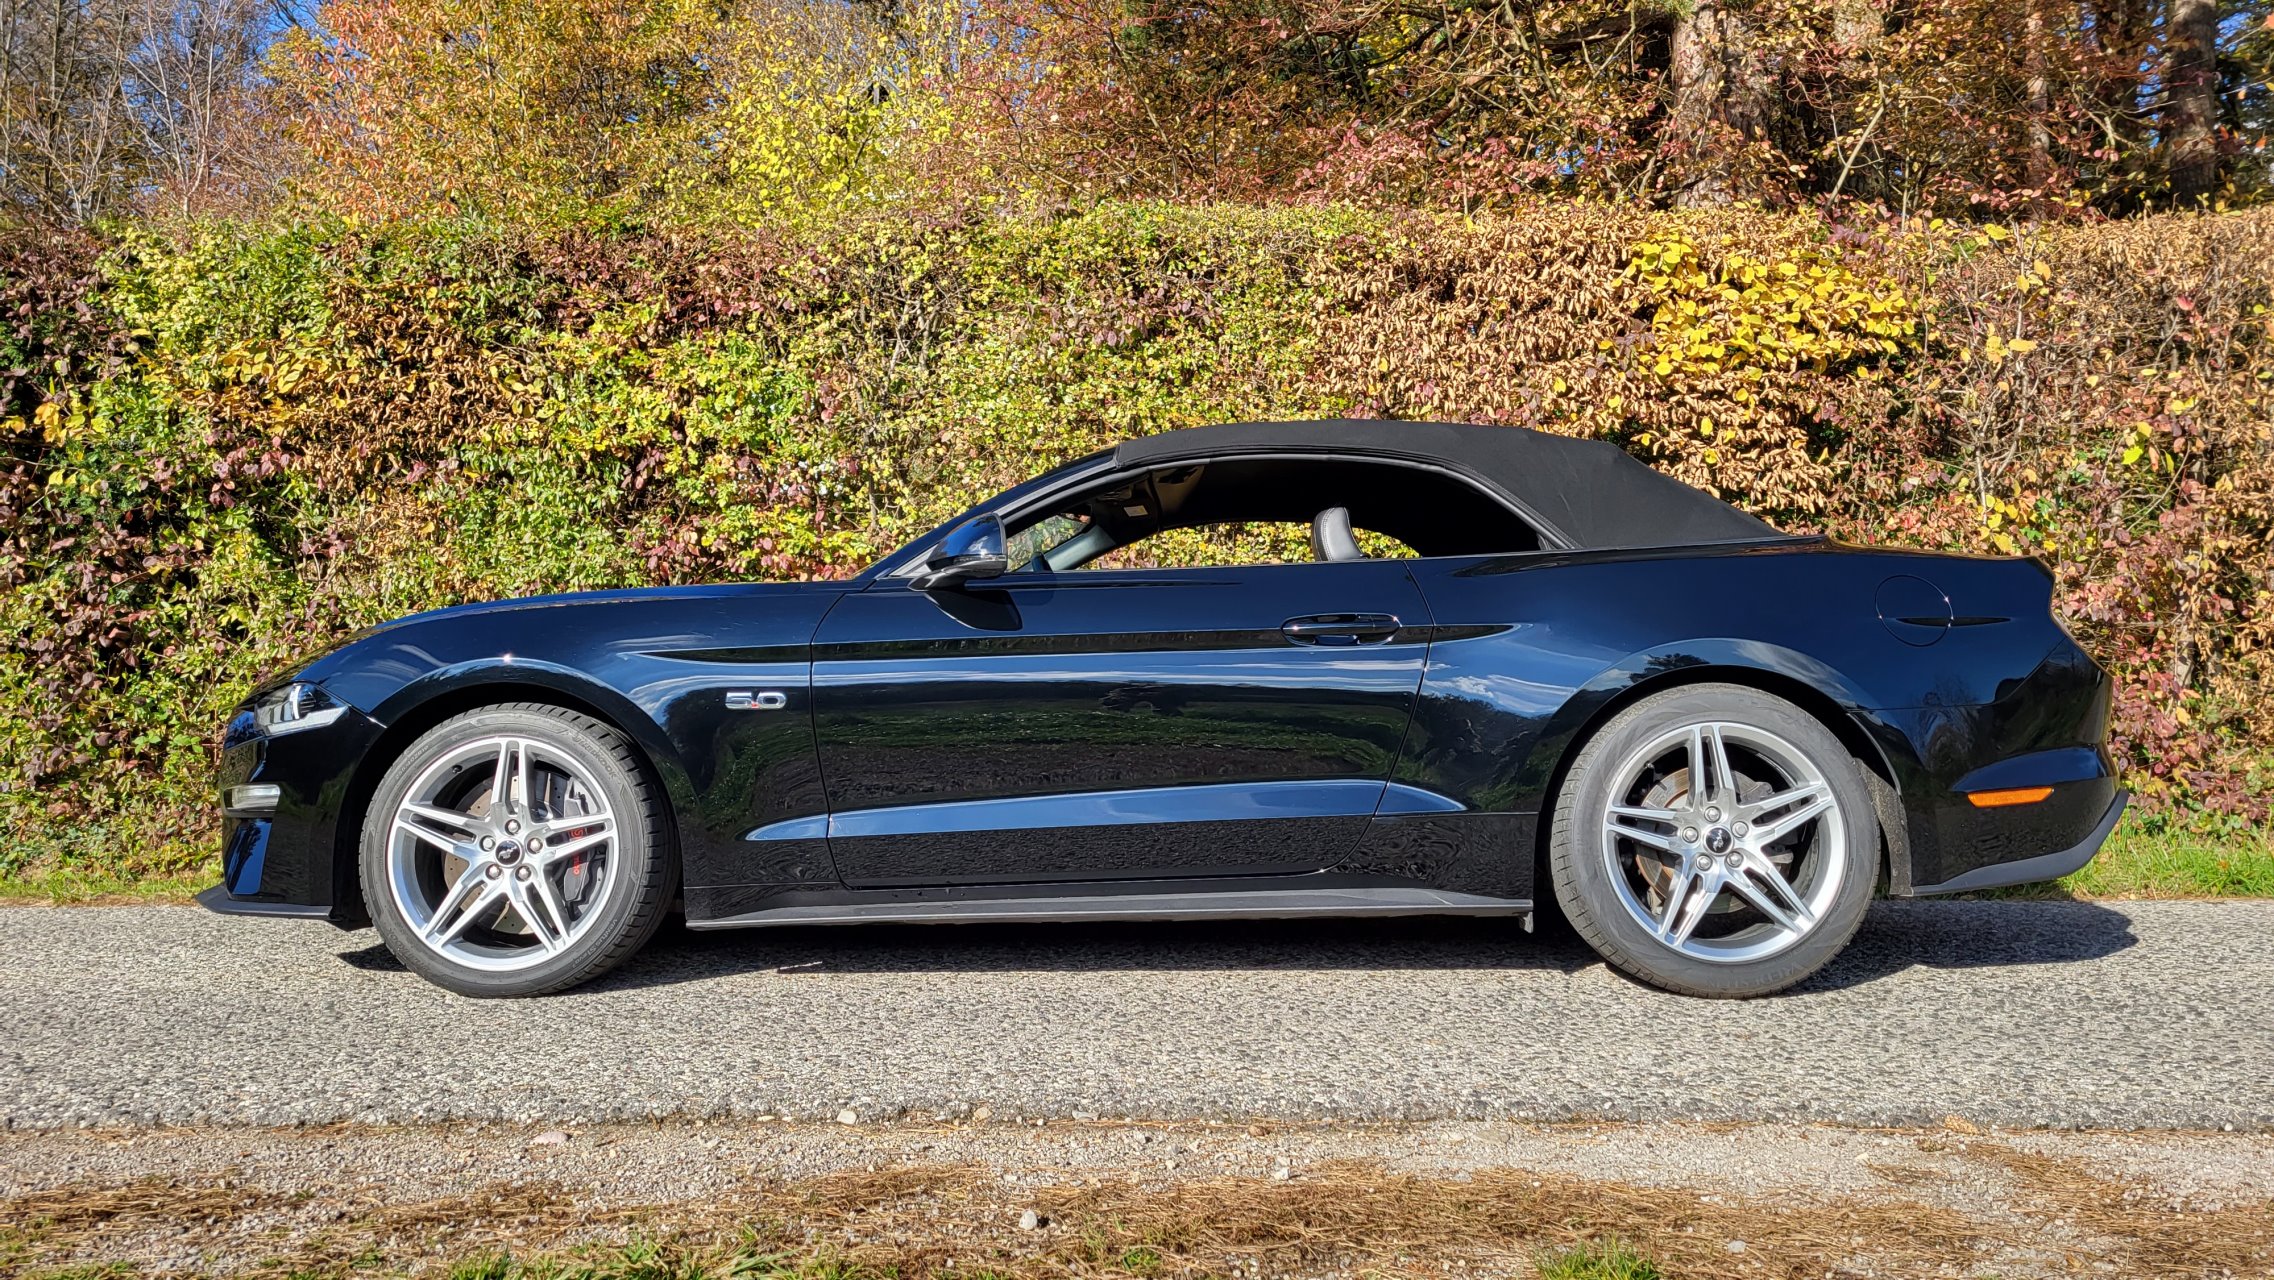 Ford Mustang GT5.0 Cabrio mit 10-Gang Automatikgetriebe fahren